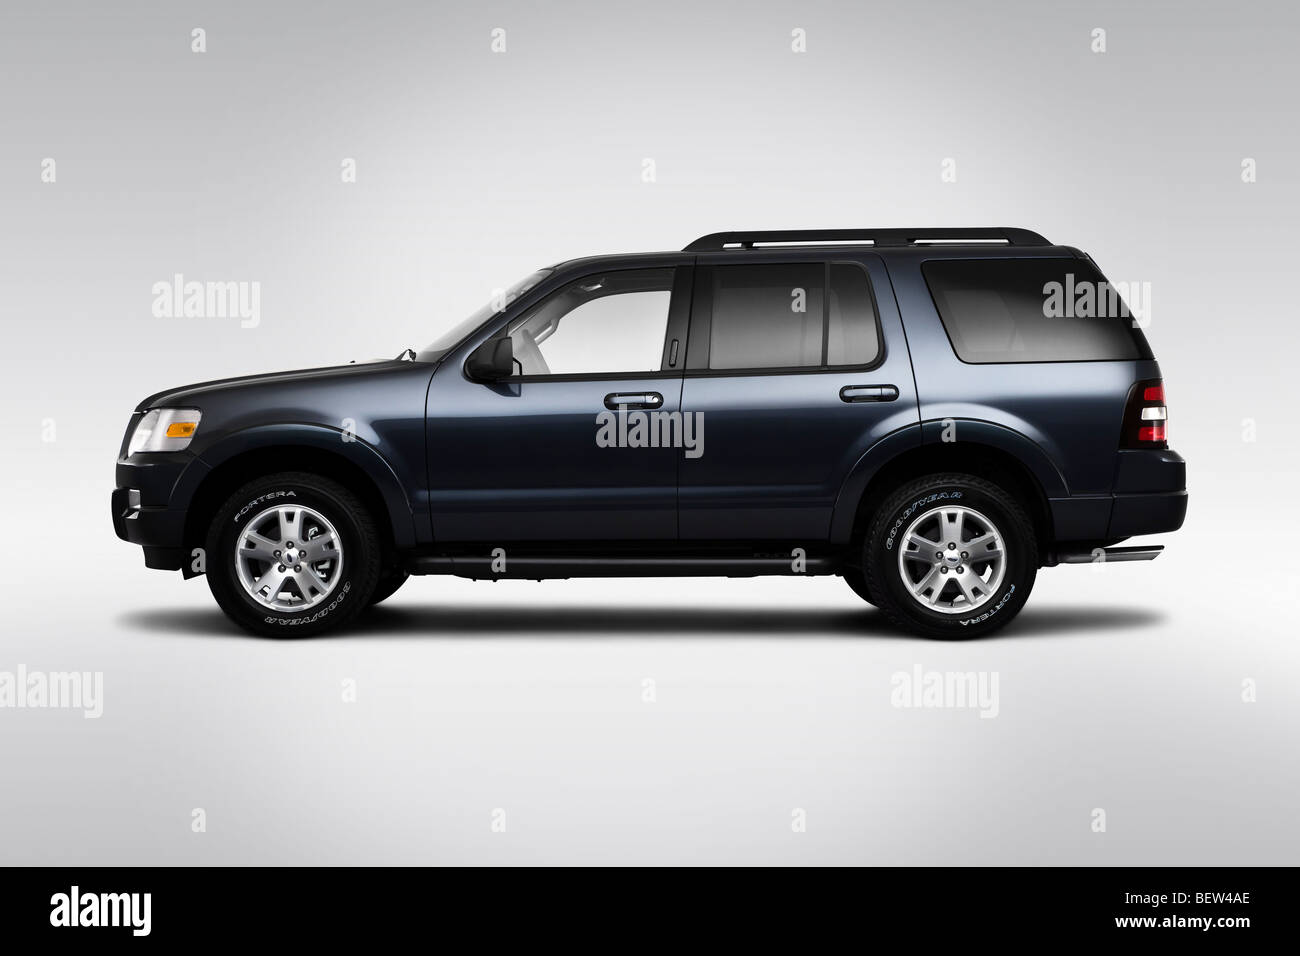 2010 Ford Explorer Xlt In Black Drivers Side Profile Stock Photo